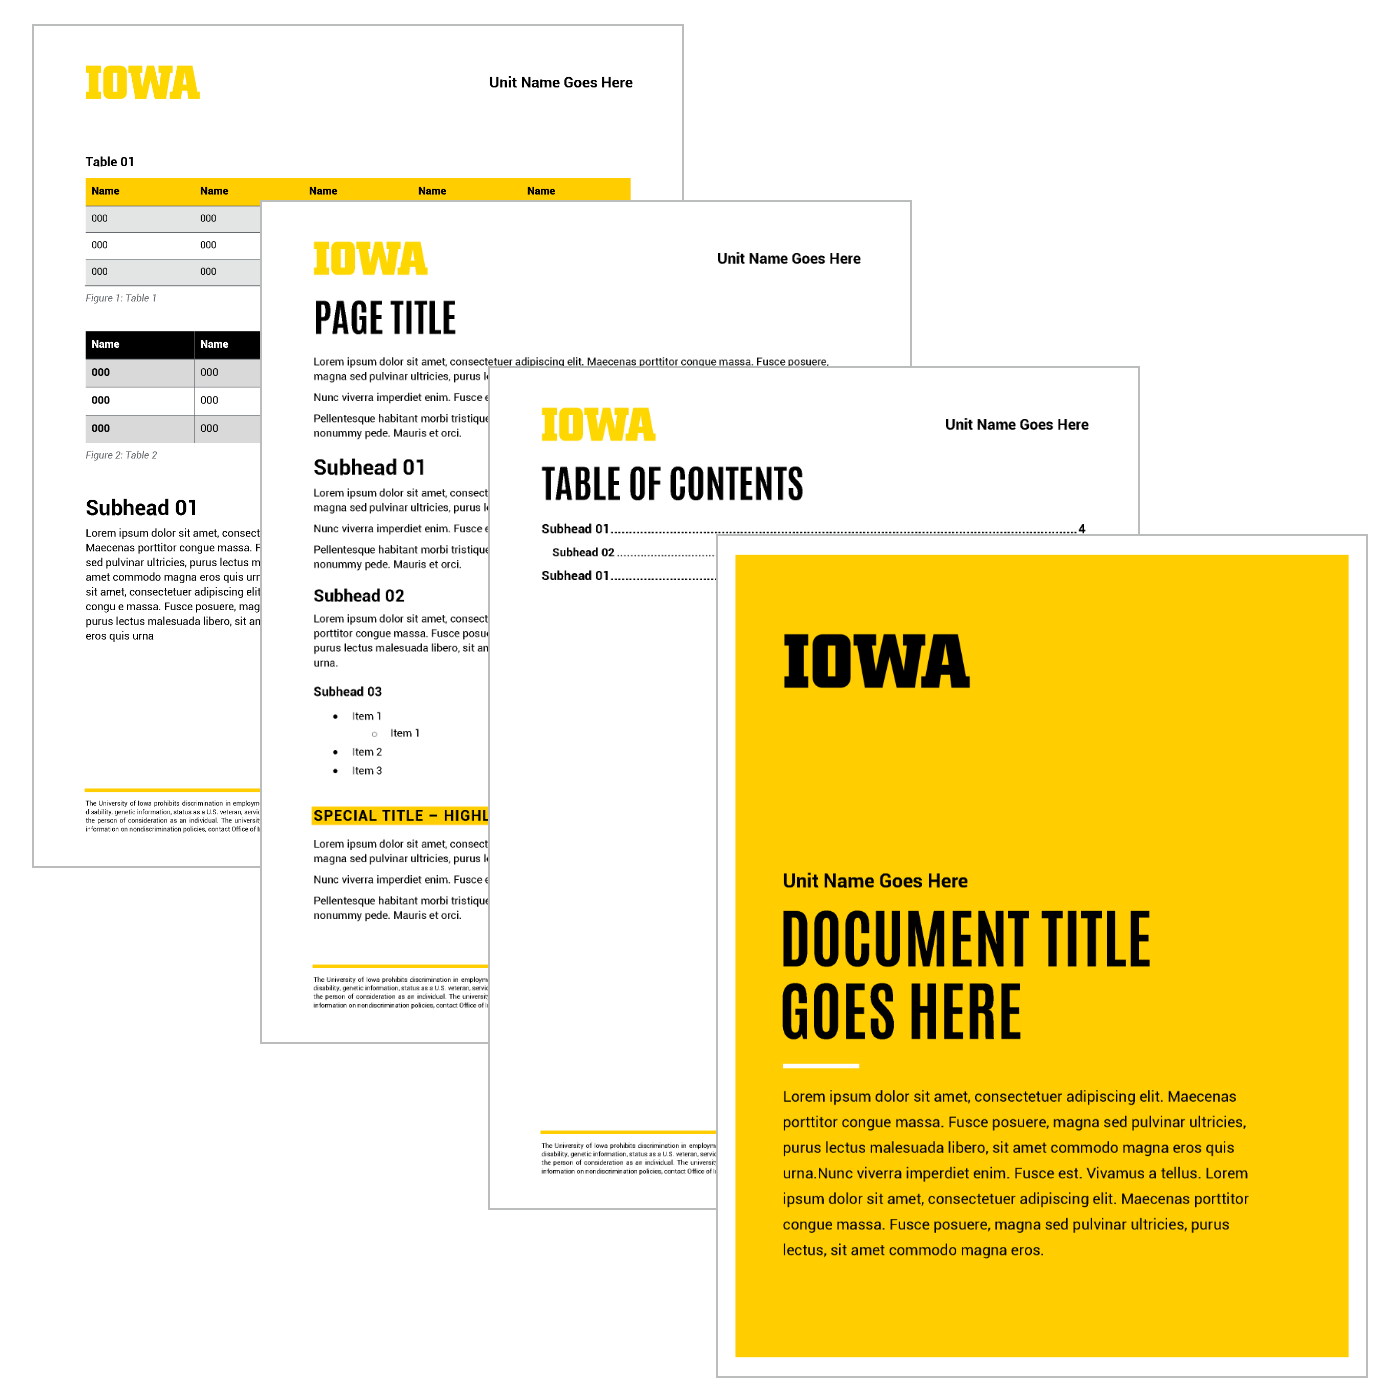 Template library | Brand Manual - The University of Iowa